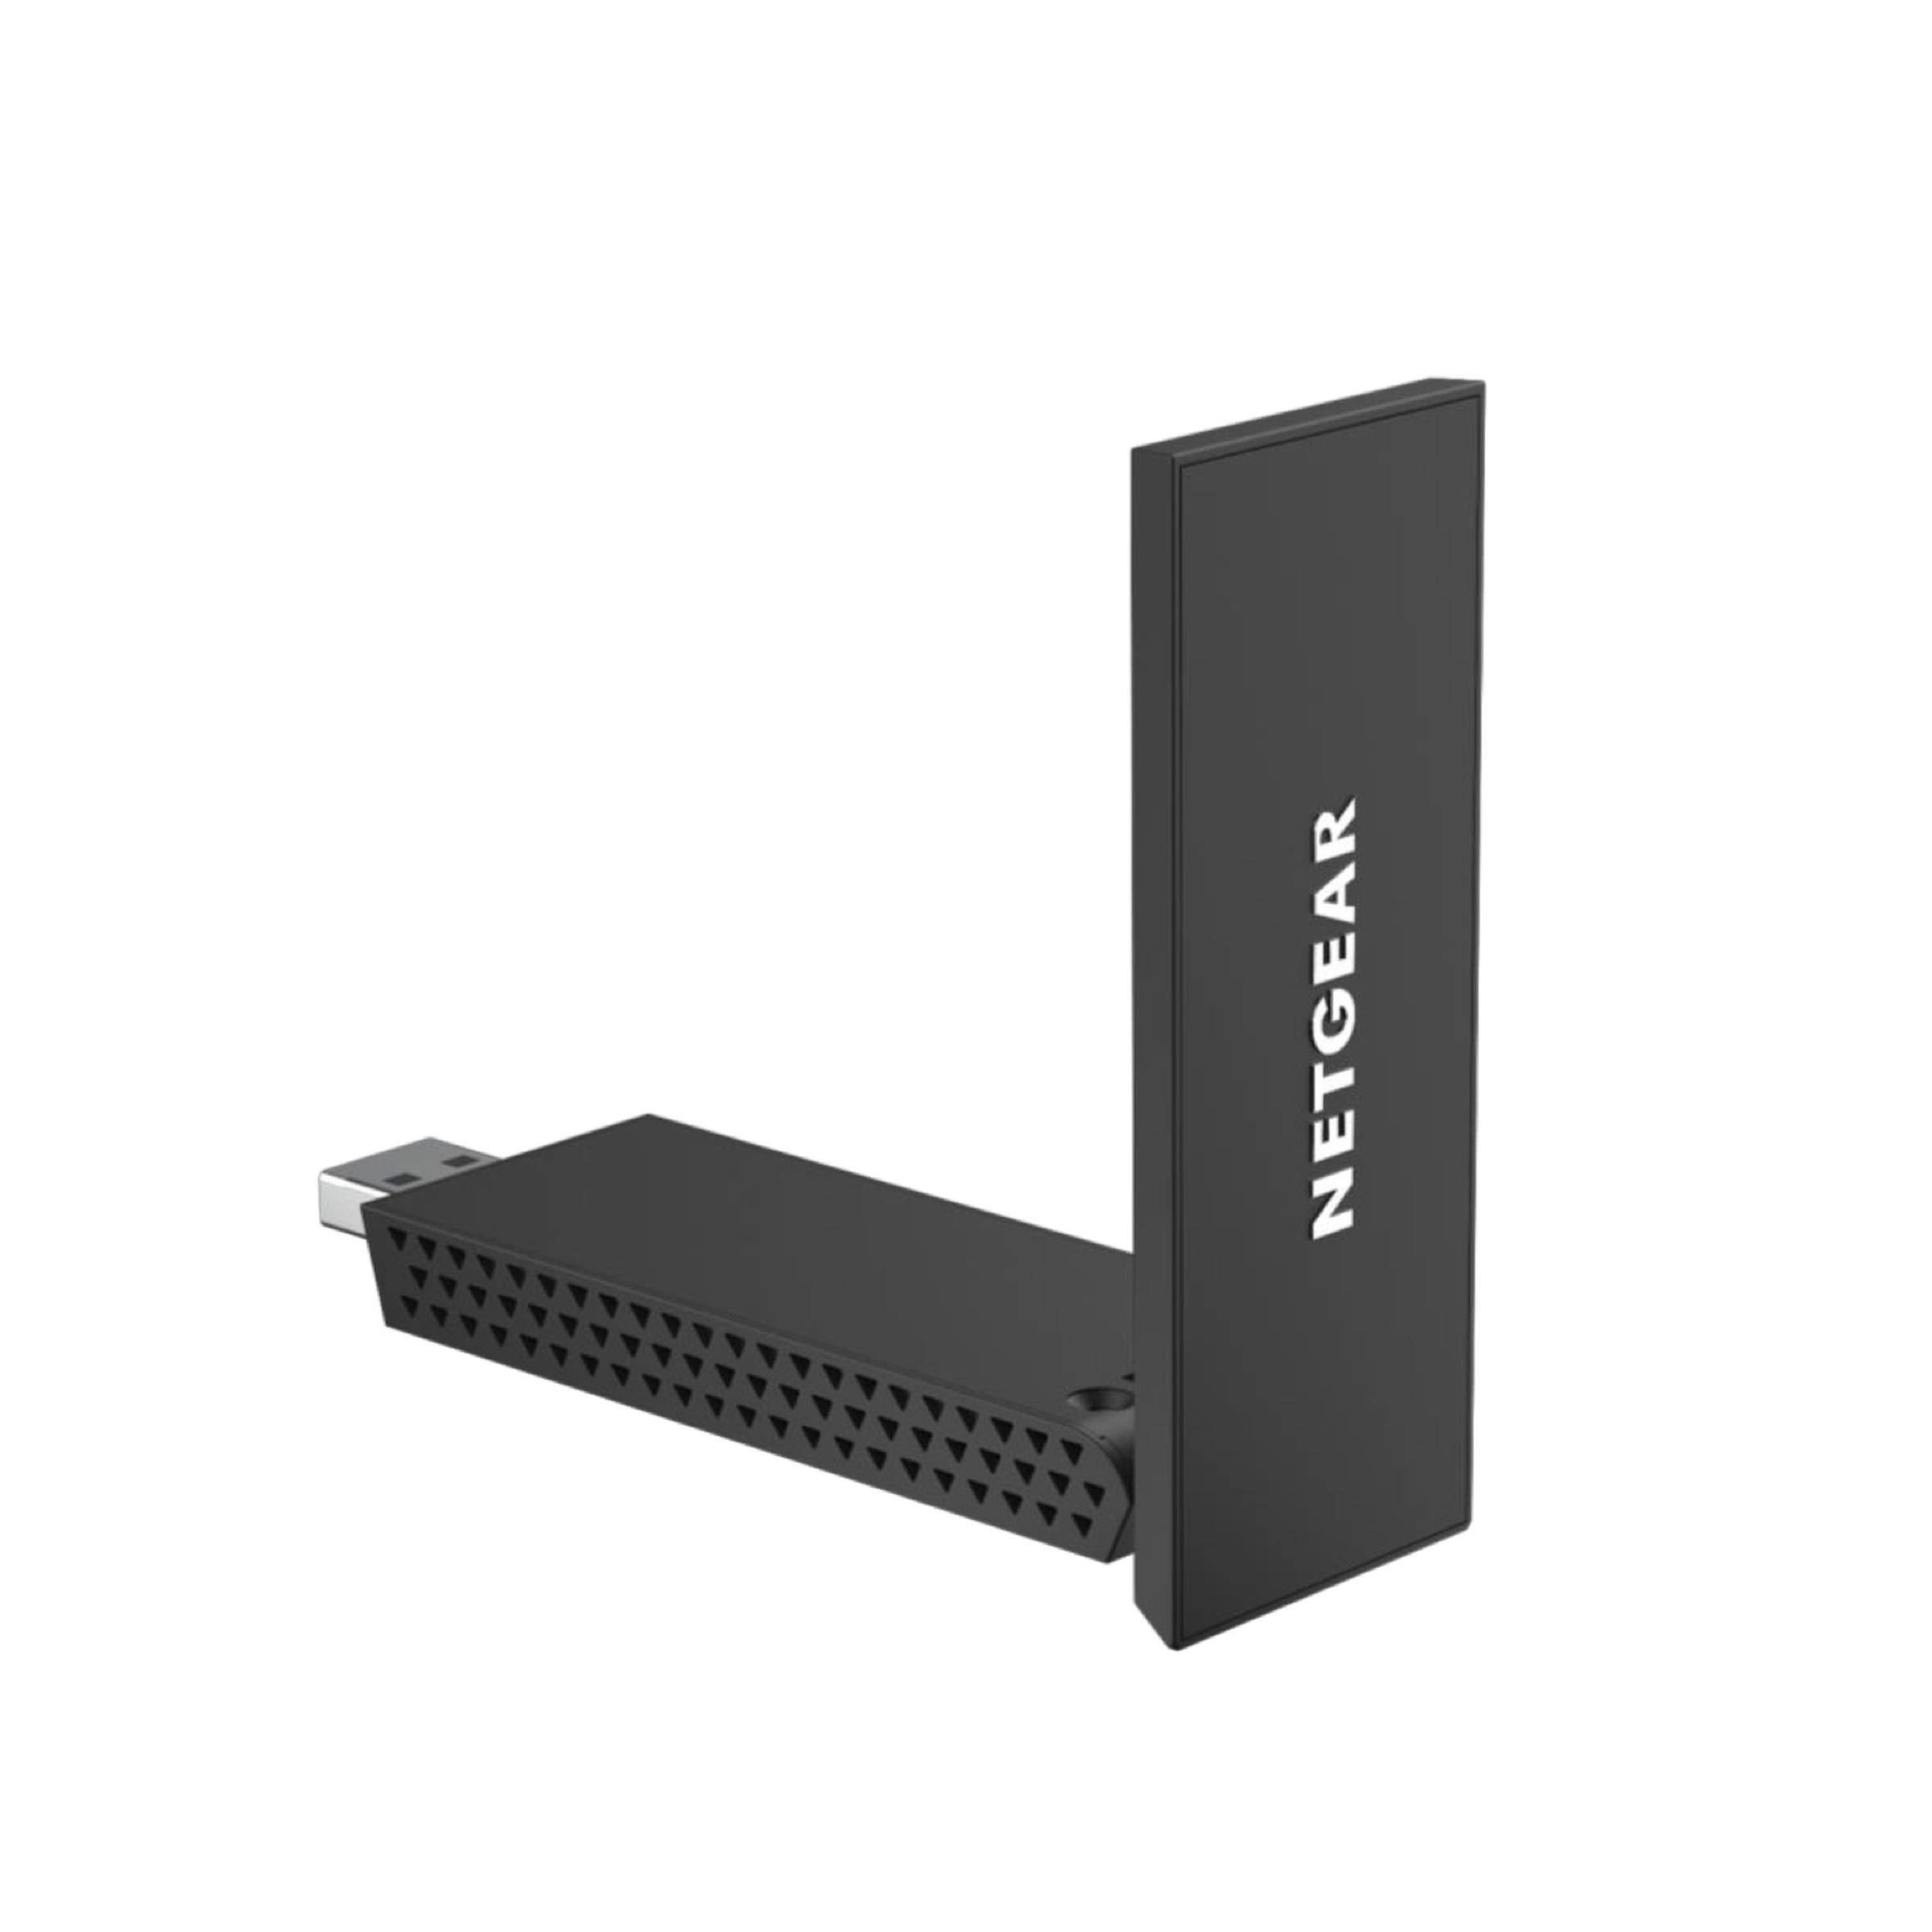 The Netgear A8000 folds out for better reception.